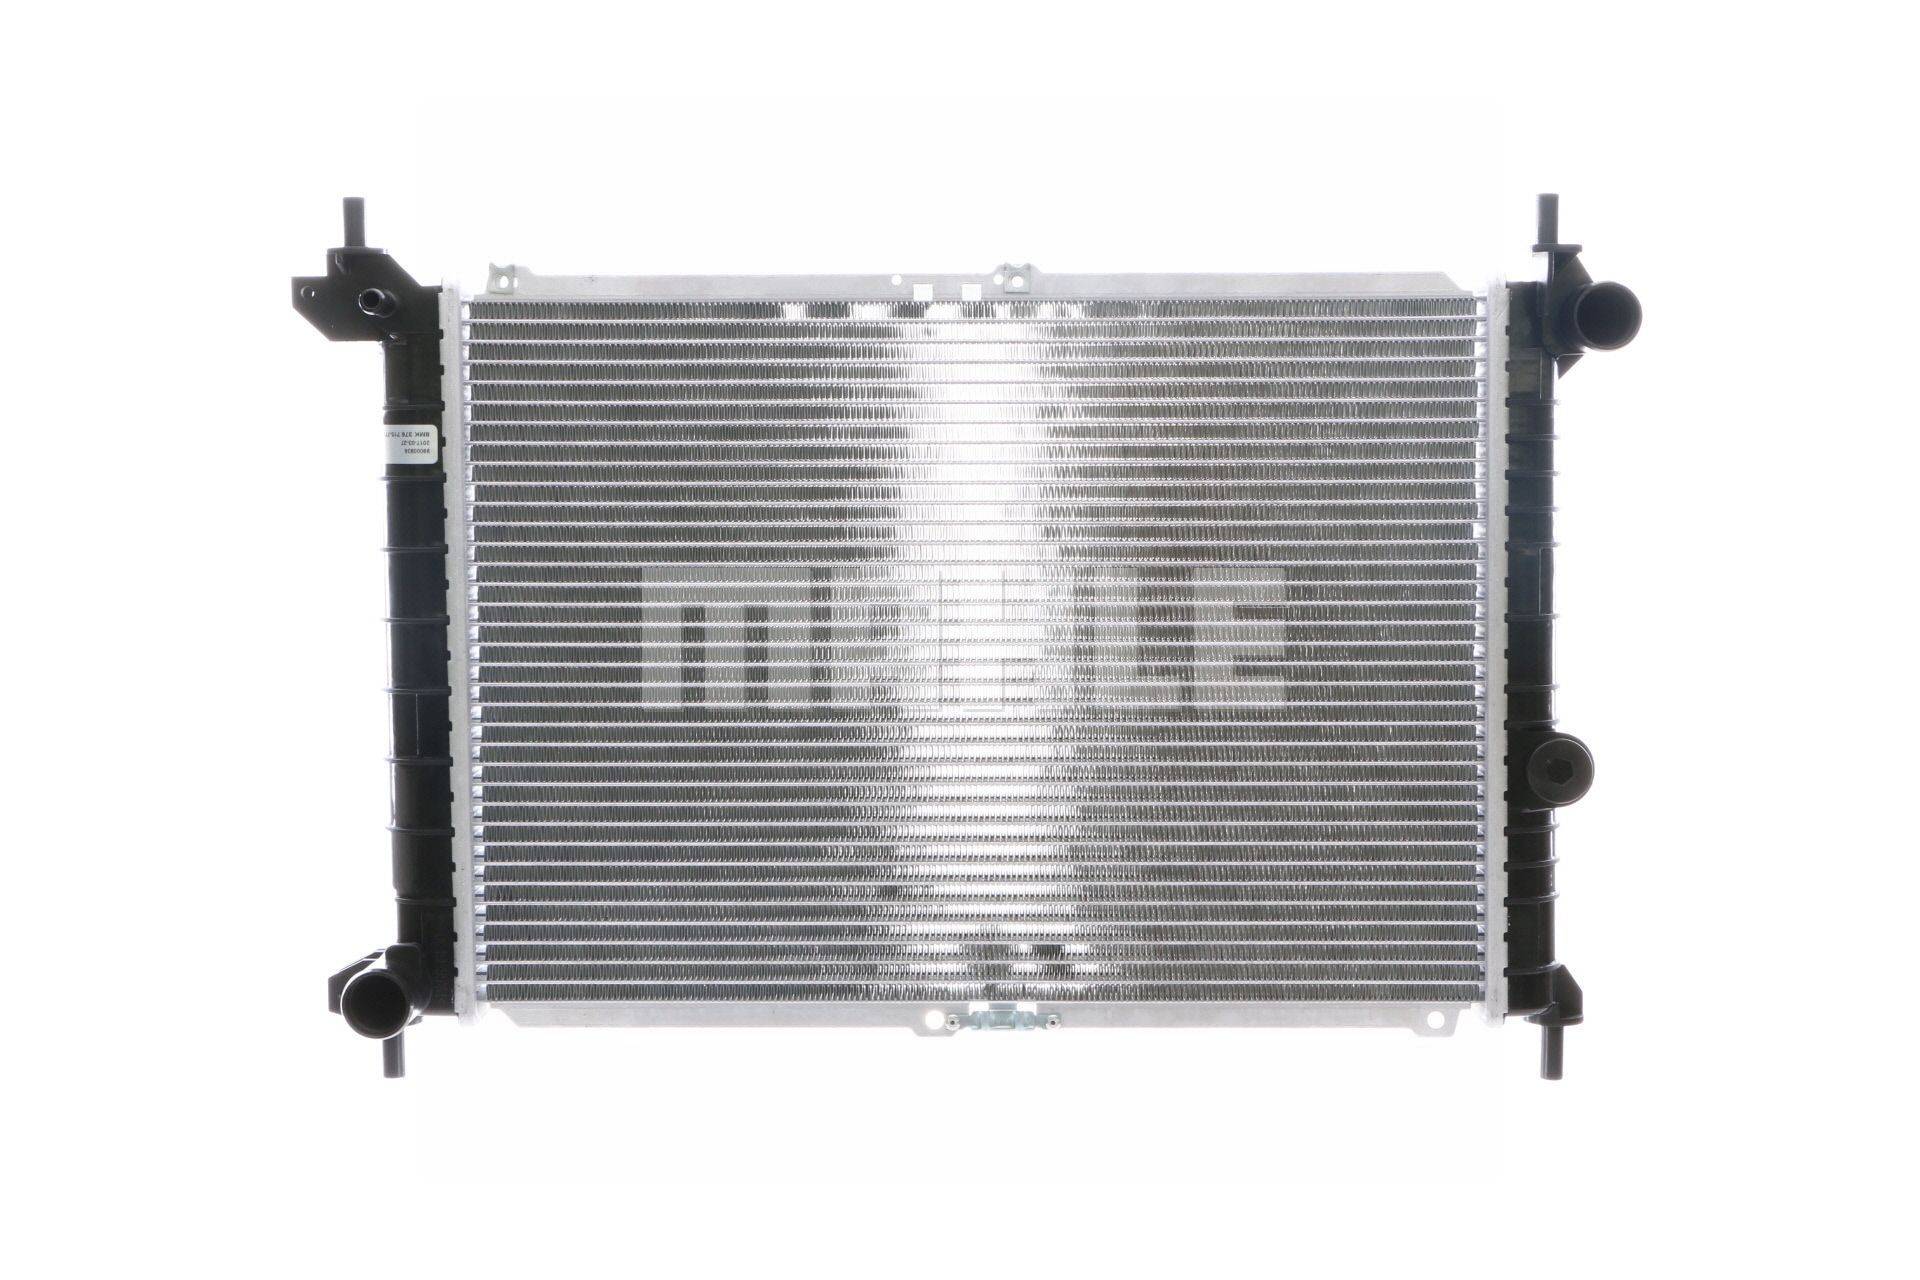 MAHLE ORIGINAL CR 443 000S Engine radiator for vehicles without air conditioning, 502 x 348 x 42 mm, Manual Transmission, Brazed cooling fins